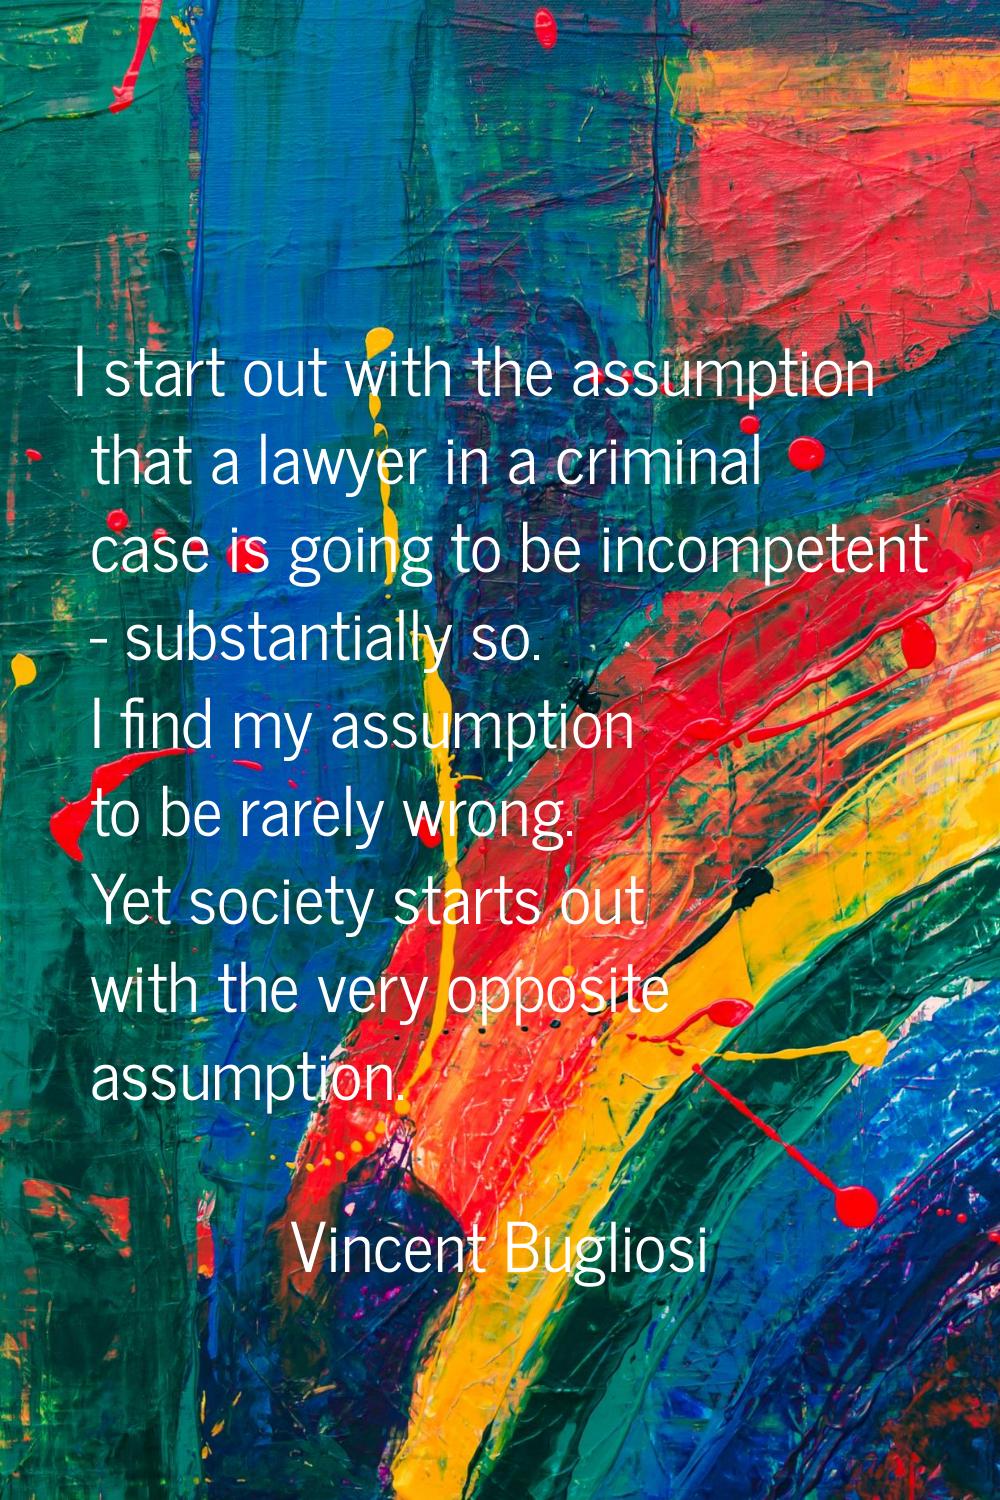 I start out with the assumption that a lawyer in a criminal case is going to be incompetent - subst